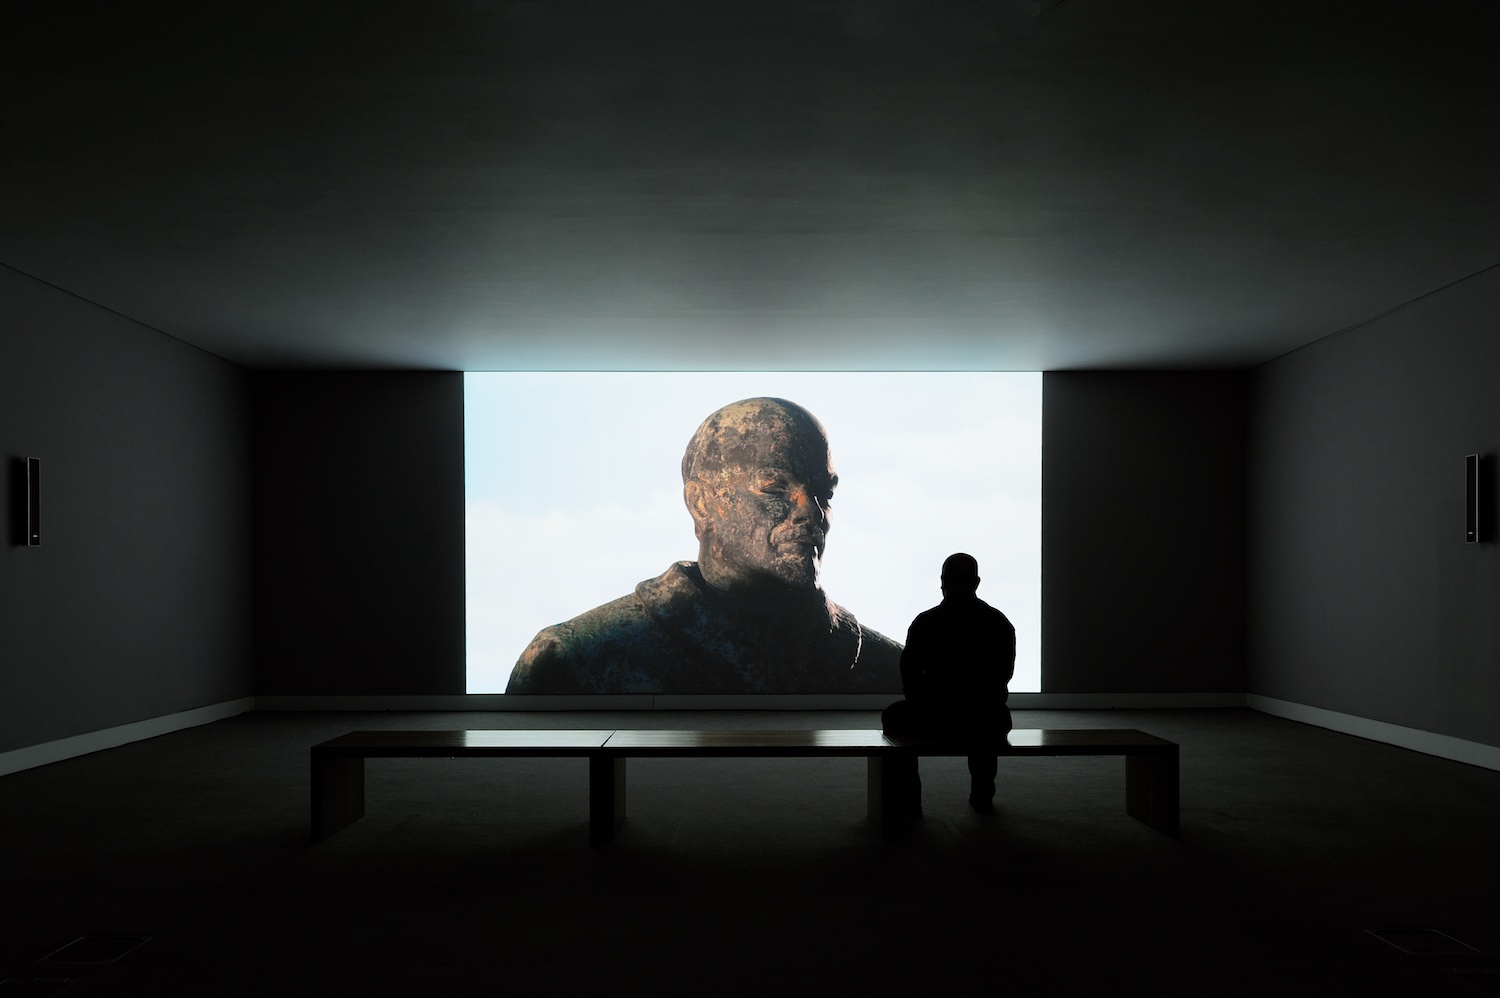  Carey Young,&nbsp;2010,&nbsp;HD video, 10 minutes 21 seconds,&nbsp;Installation view at mima, Middlesbrough. Photo: Thierry Bal 